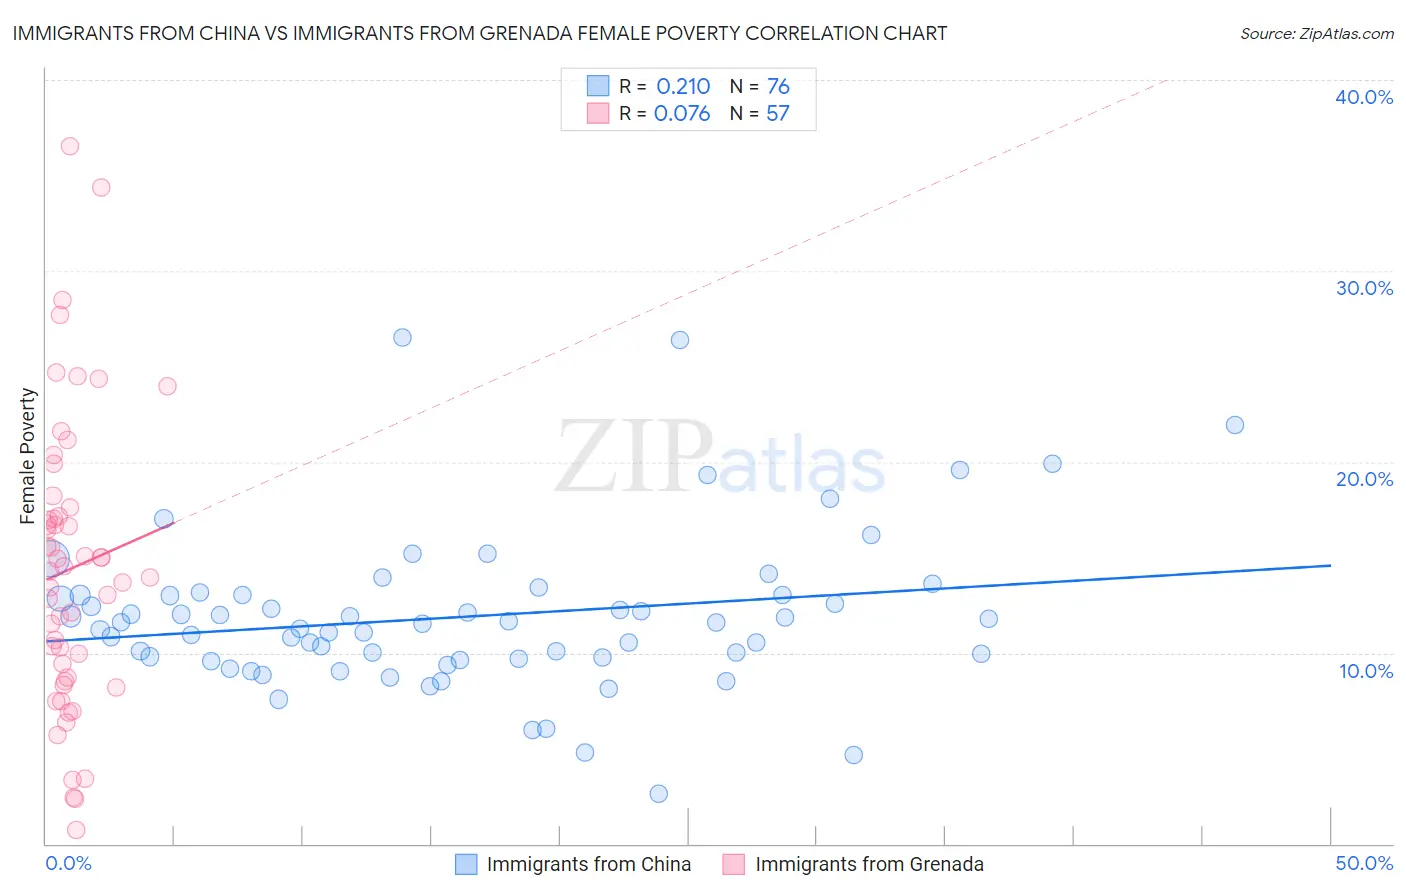 Immigrants from China vs Immigrants from Grenada Female Poverty